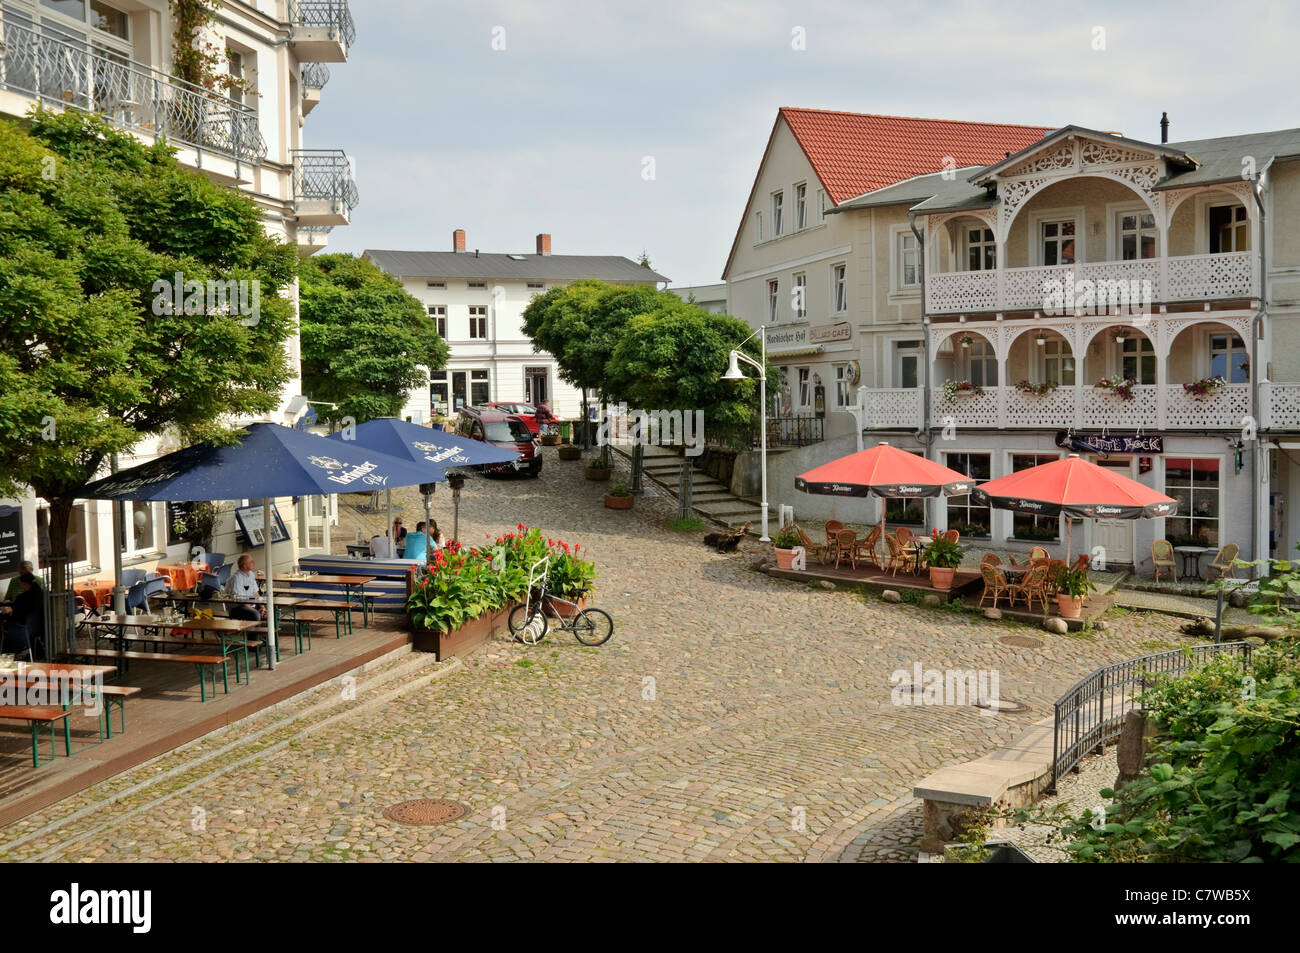 In Sassnitz Old Town on the Island of Ruegen, Baltic Sea, Germany. Stock Photo